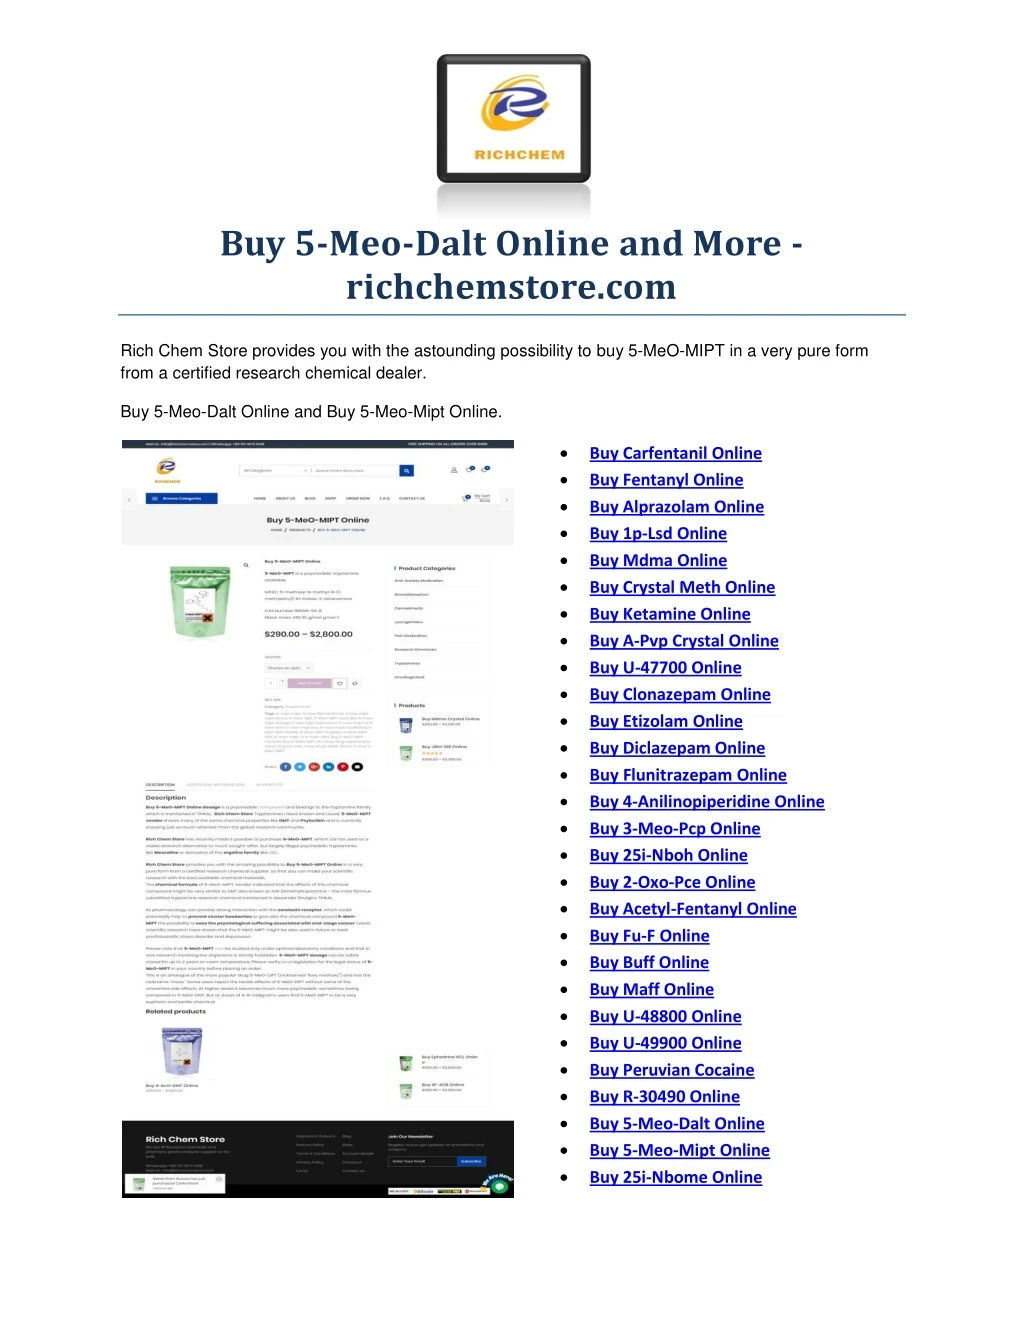 buy 5 meo dalt online and more richchemstore com